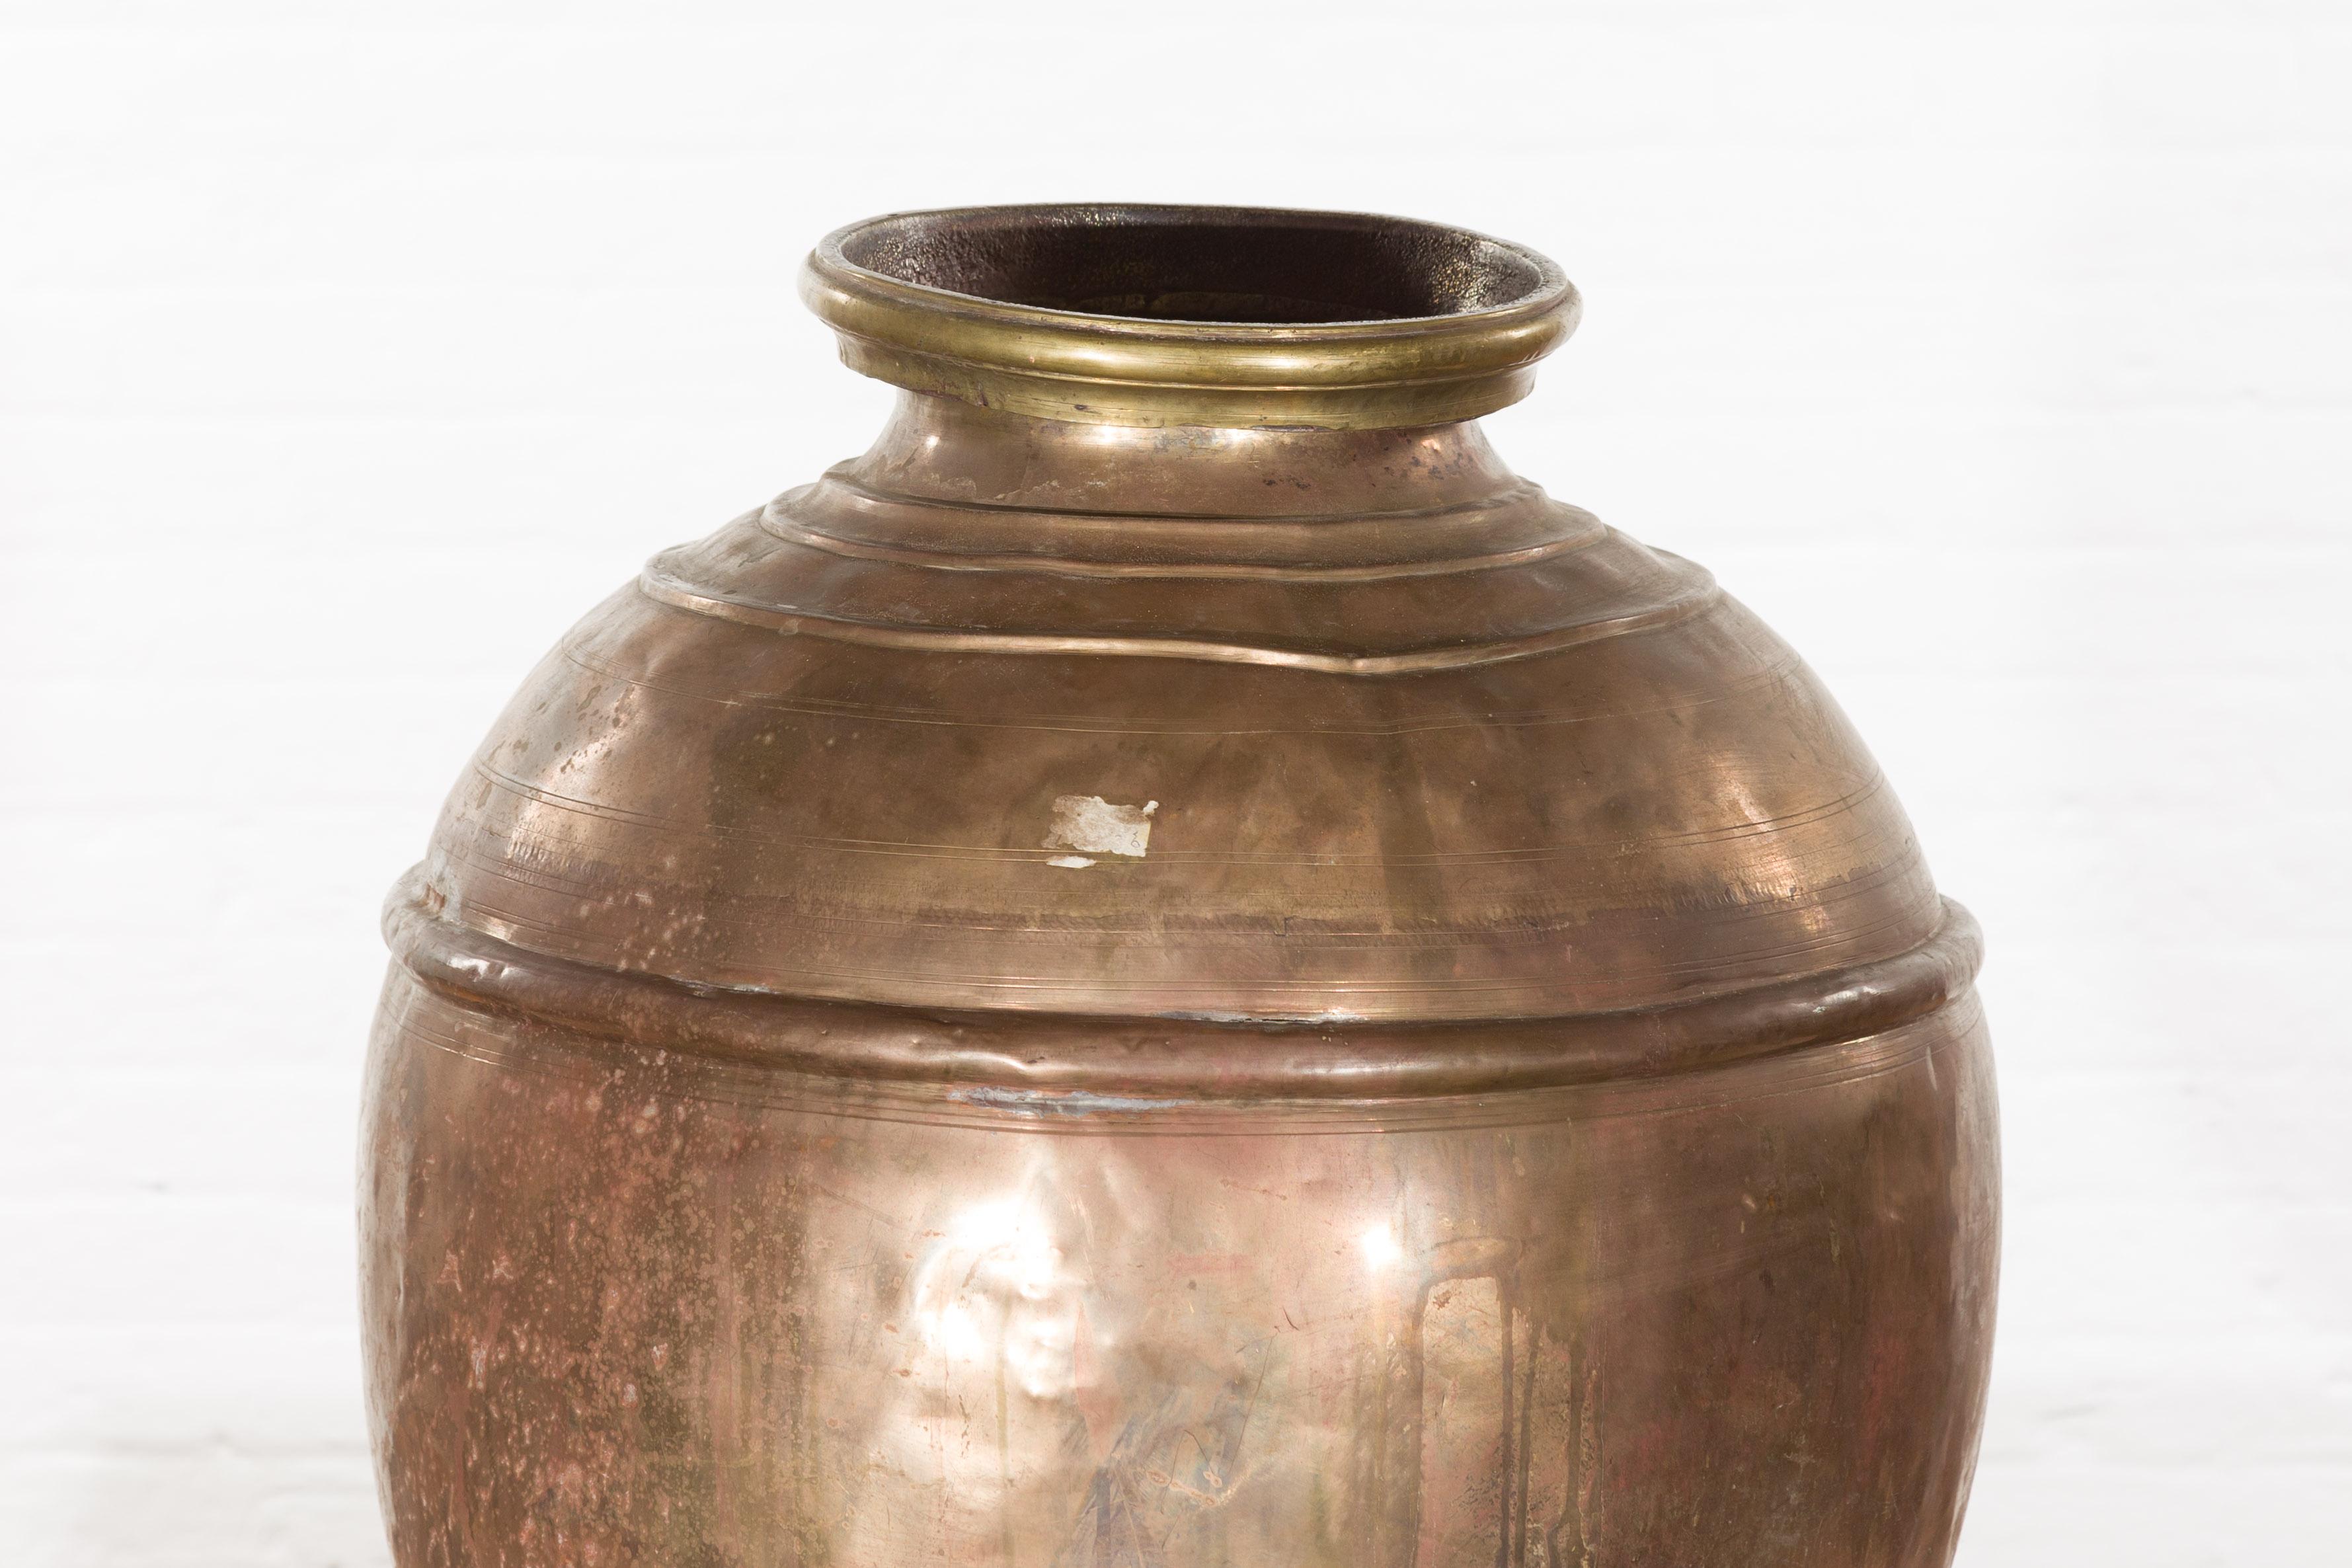 Indian Vintage Brass Water Jar with Concentric Rings and Distressed Appearance 3